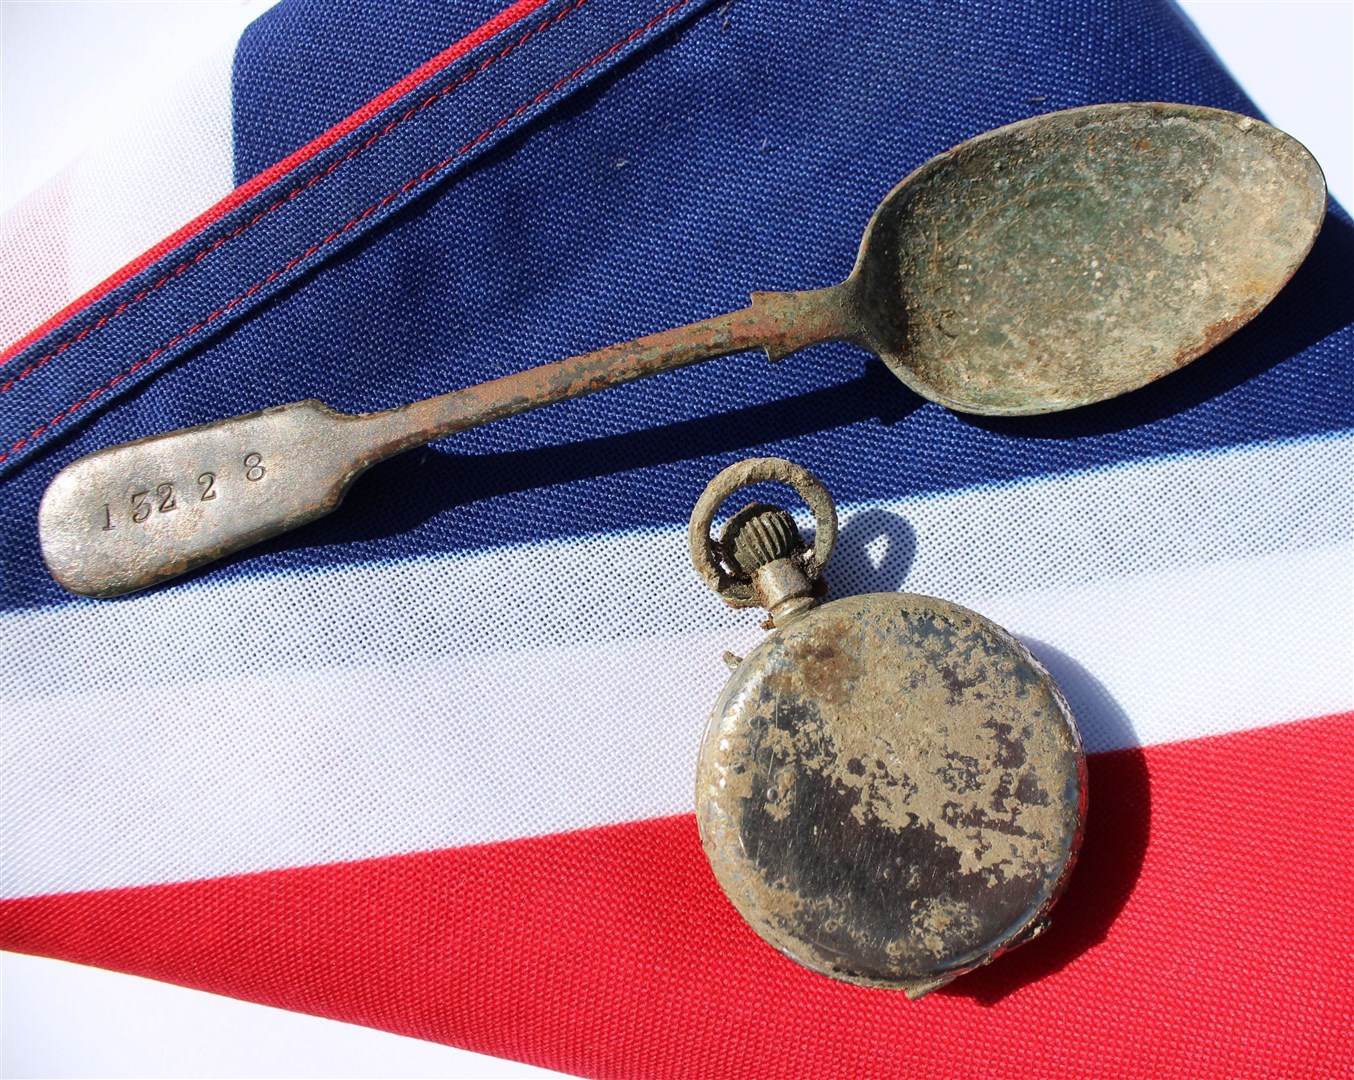 A spoon and a pocket watch which belonged to Private William Johnston and were found alongside his remains (MoD/A Eden/Crown Copyright/PA)